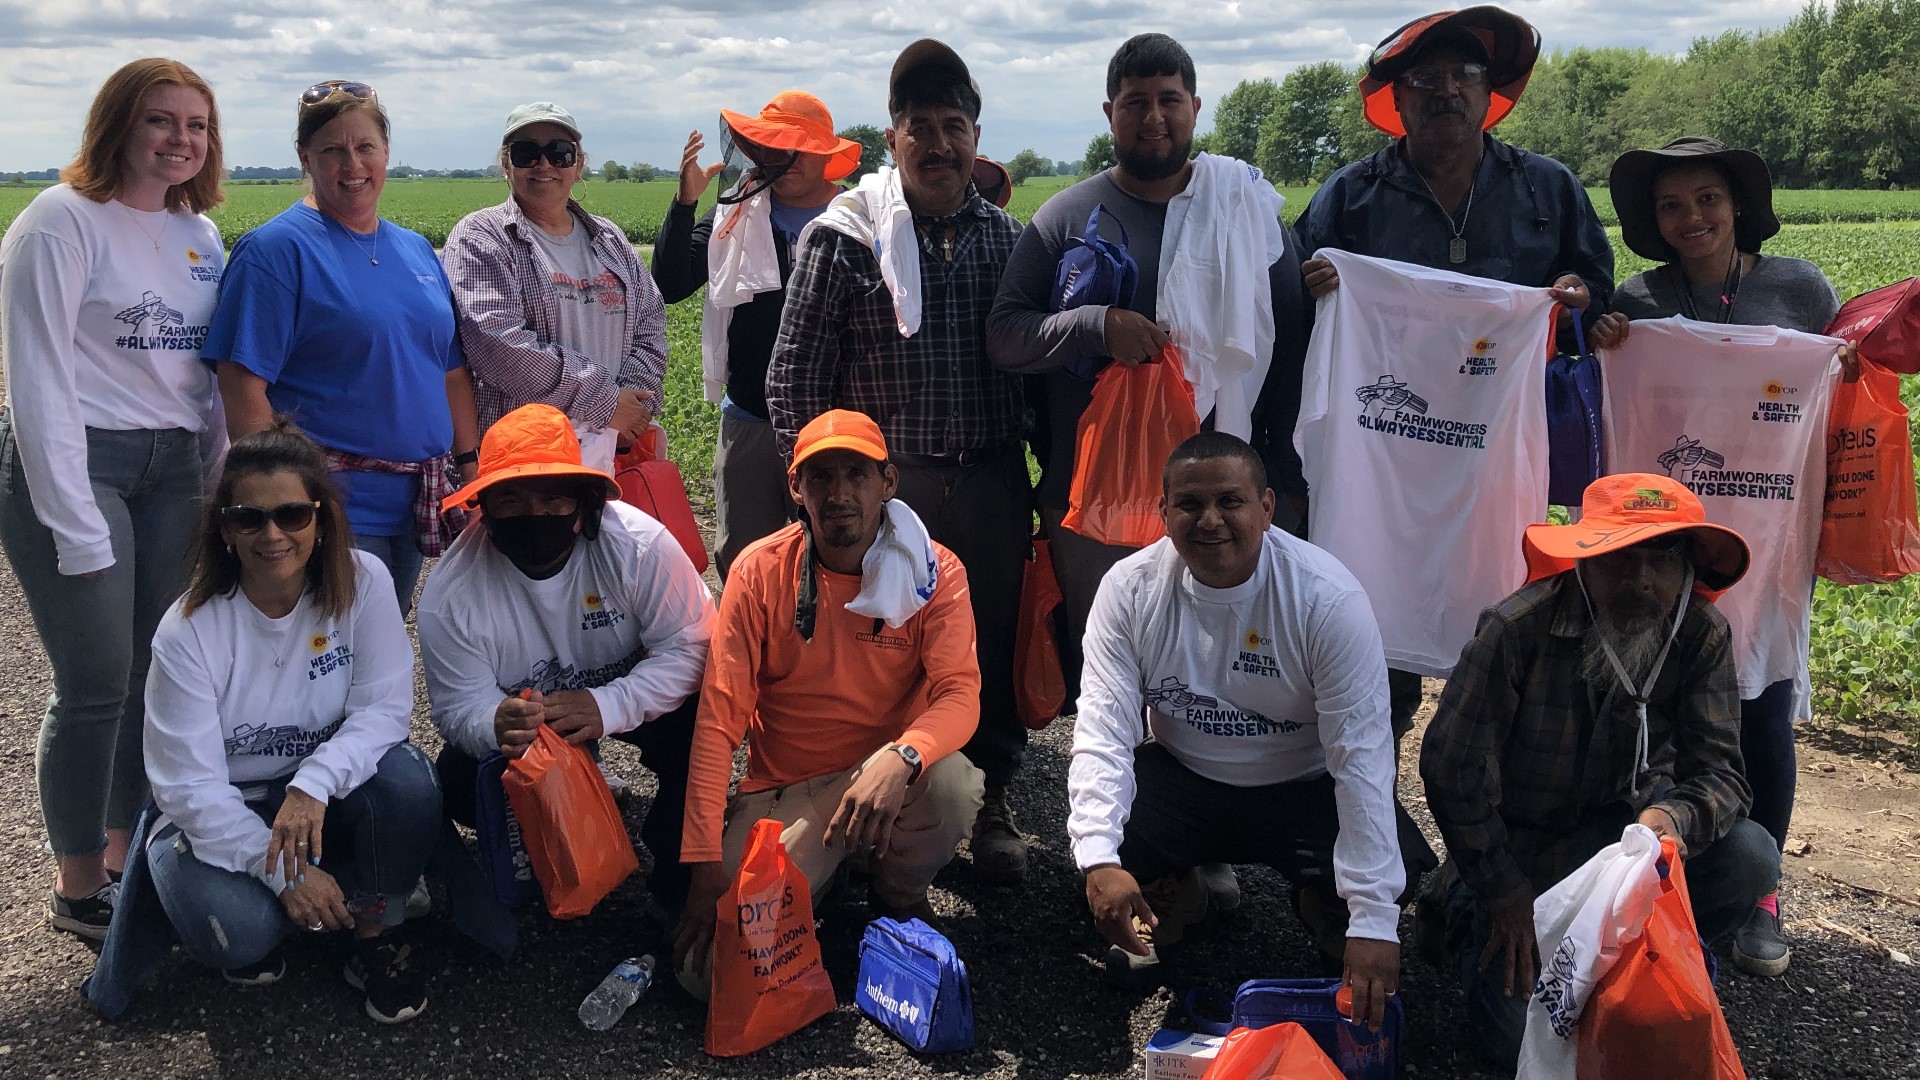 "Farmworker Awareness Week" is March 27-31 and the group is collecting donated long sleeve shirts to pass out to farmworkers, essential for the hot summer months.